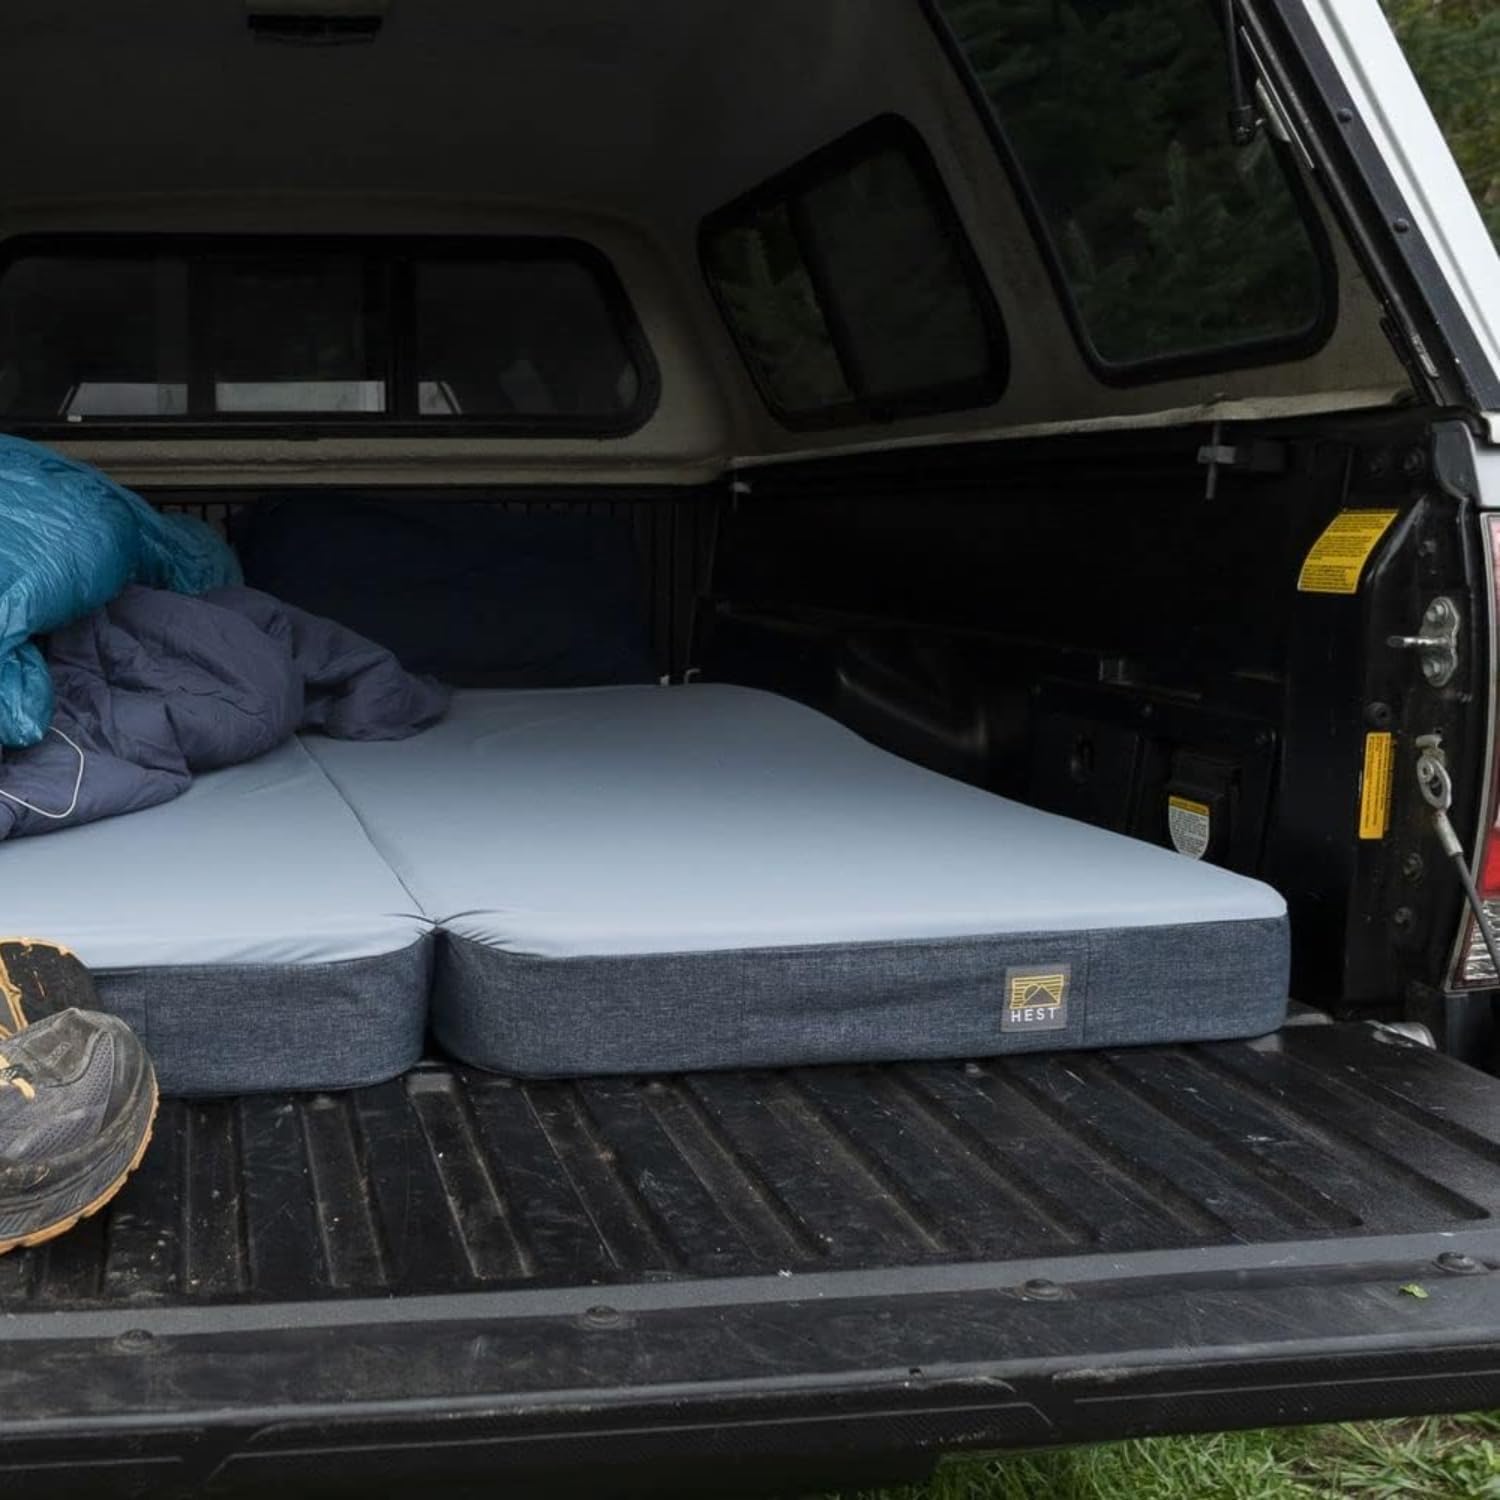 HEST Dually - Portable Camping truck bed mattress